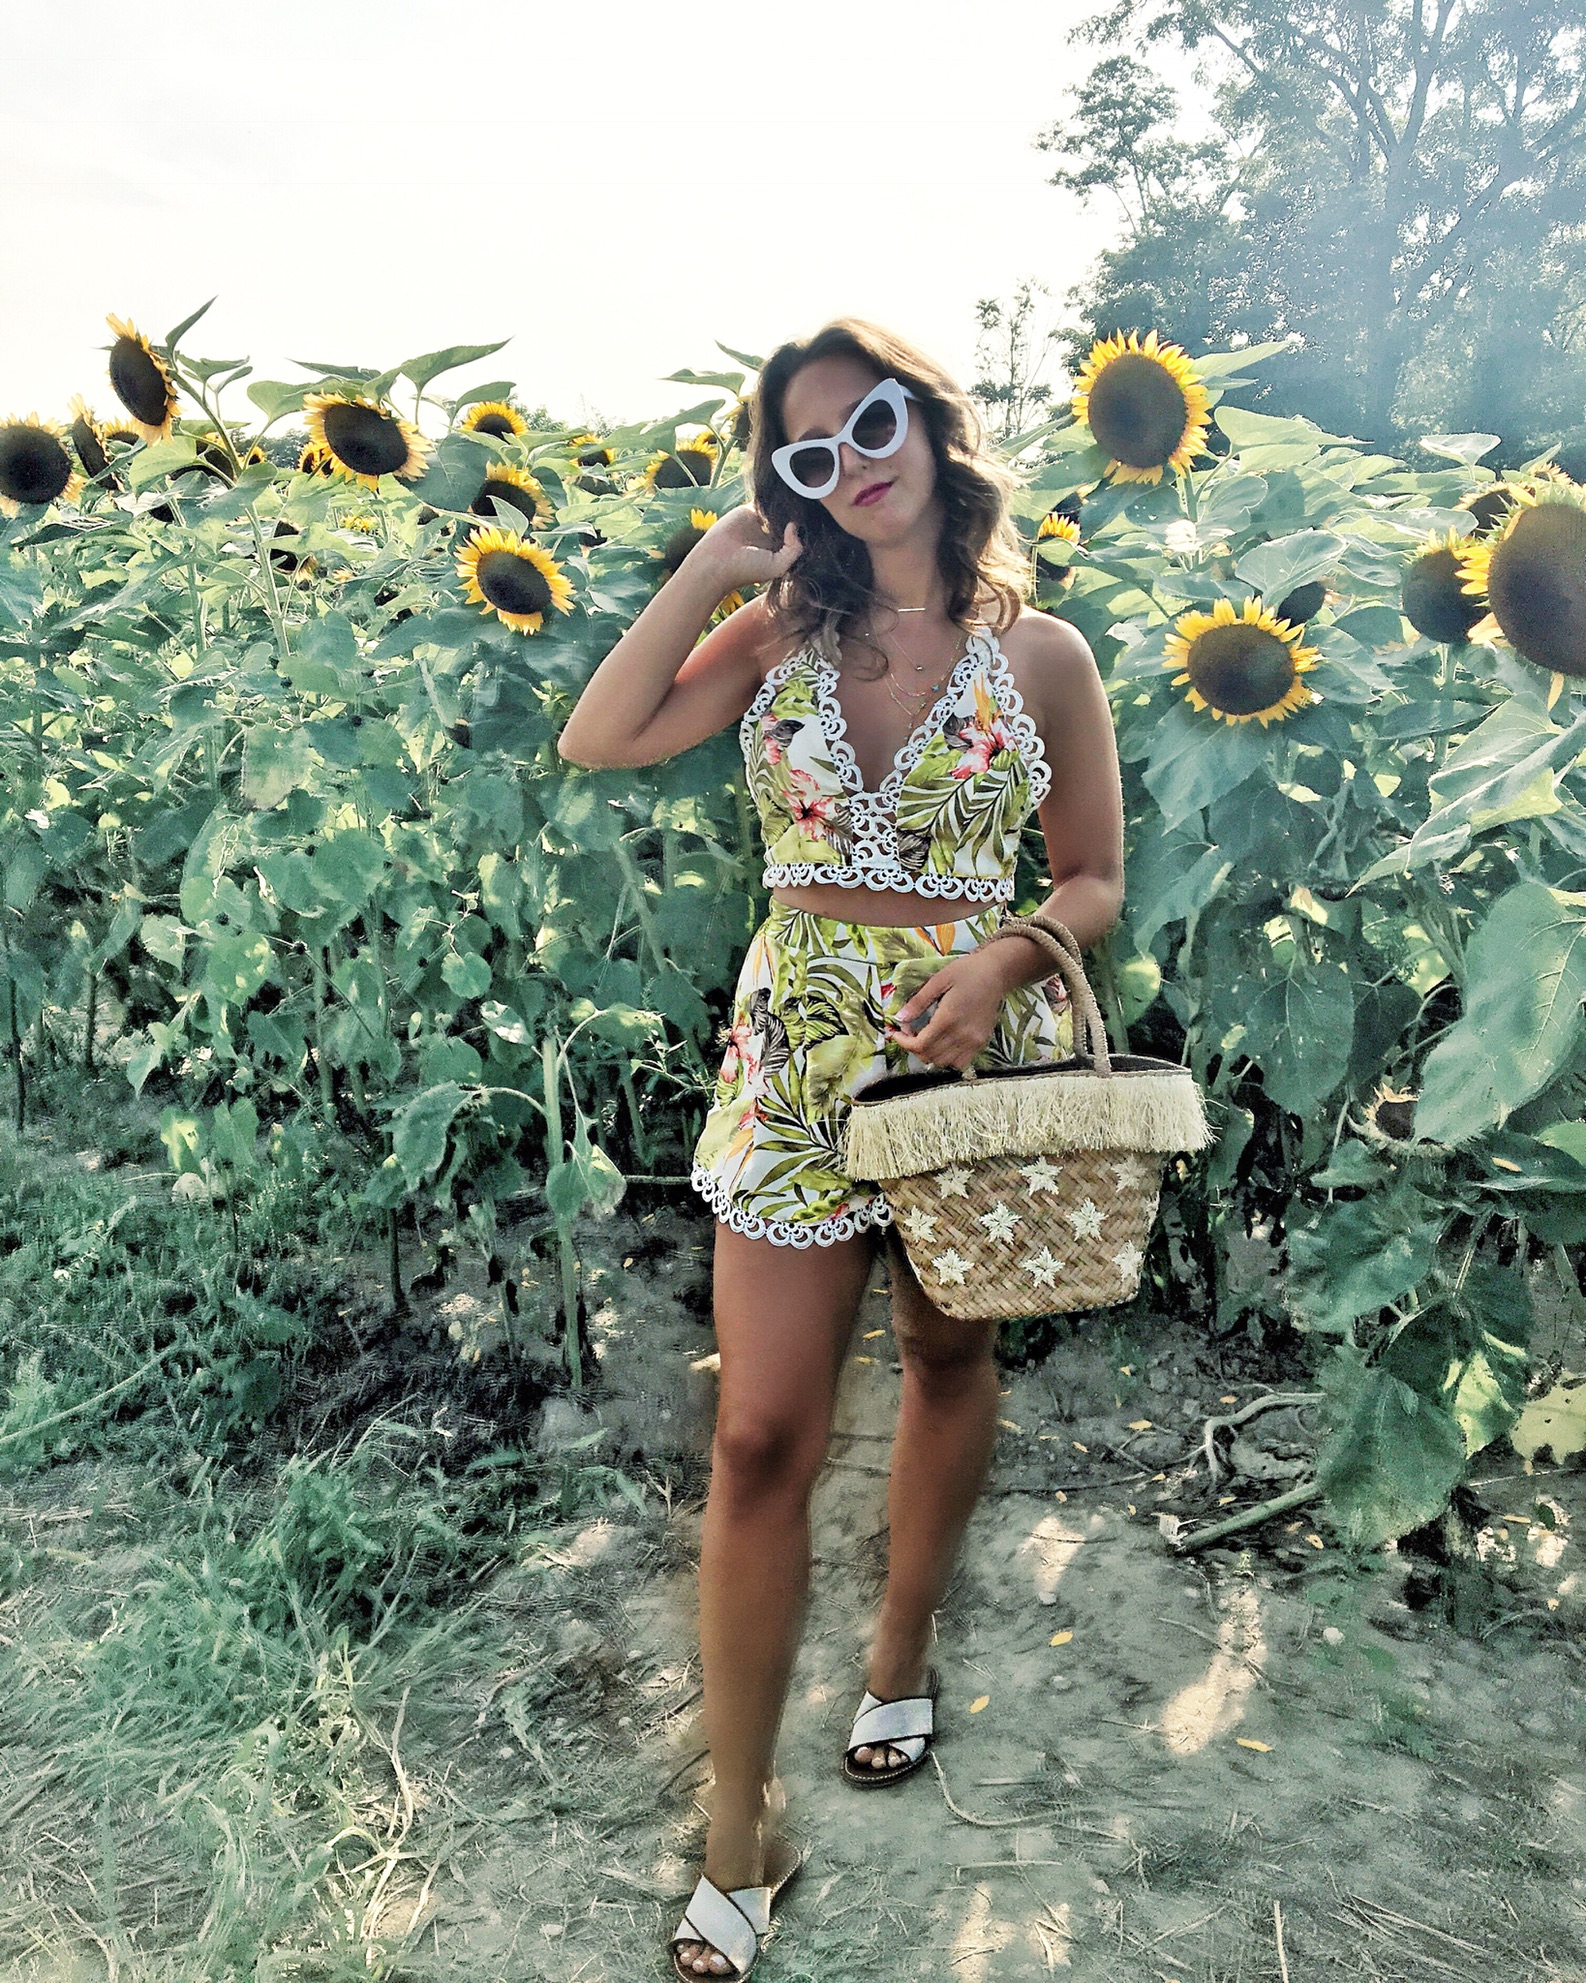 FOUR B - Top 10 Things To Do On The North Fork This Summer #northfork #nofo #blogger #summer #sunflower #longisland #travel #vacation #summer #bloggerstyle #summerstyle #outfit #summeroutfit